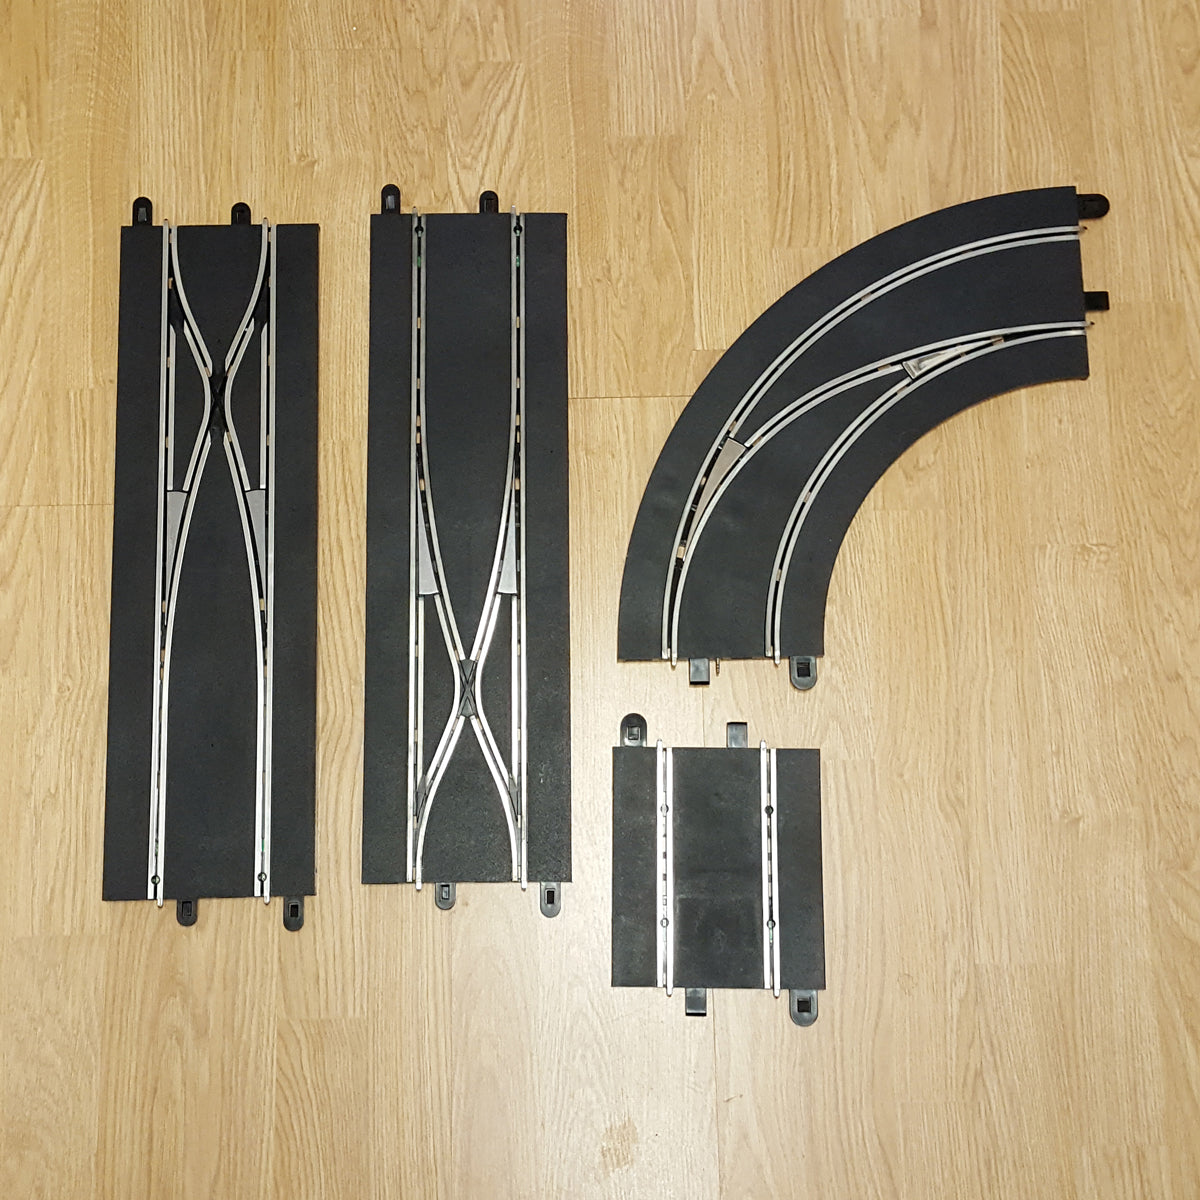 Scalextric Digital 1:32 Track Expansion C7036, C7008 Crossover Straights & Curve